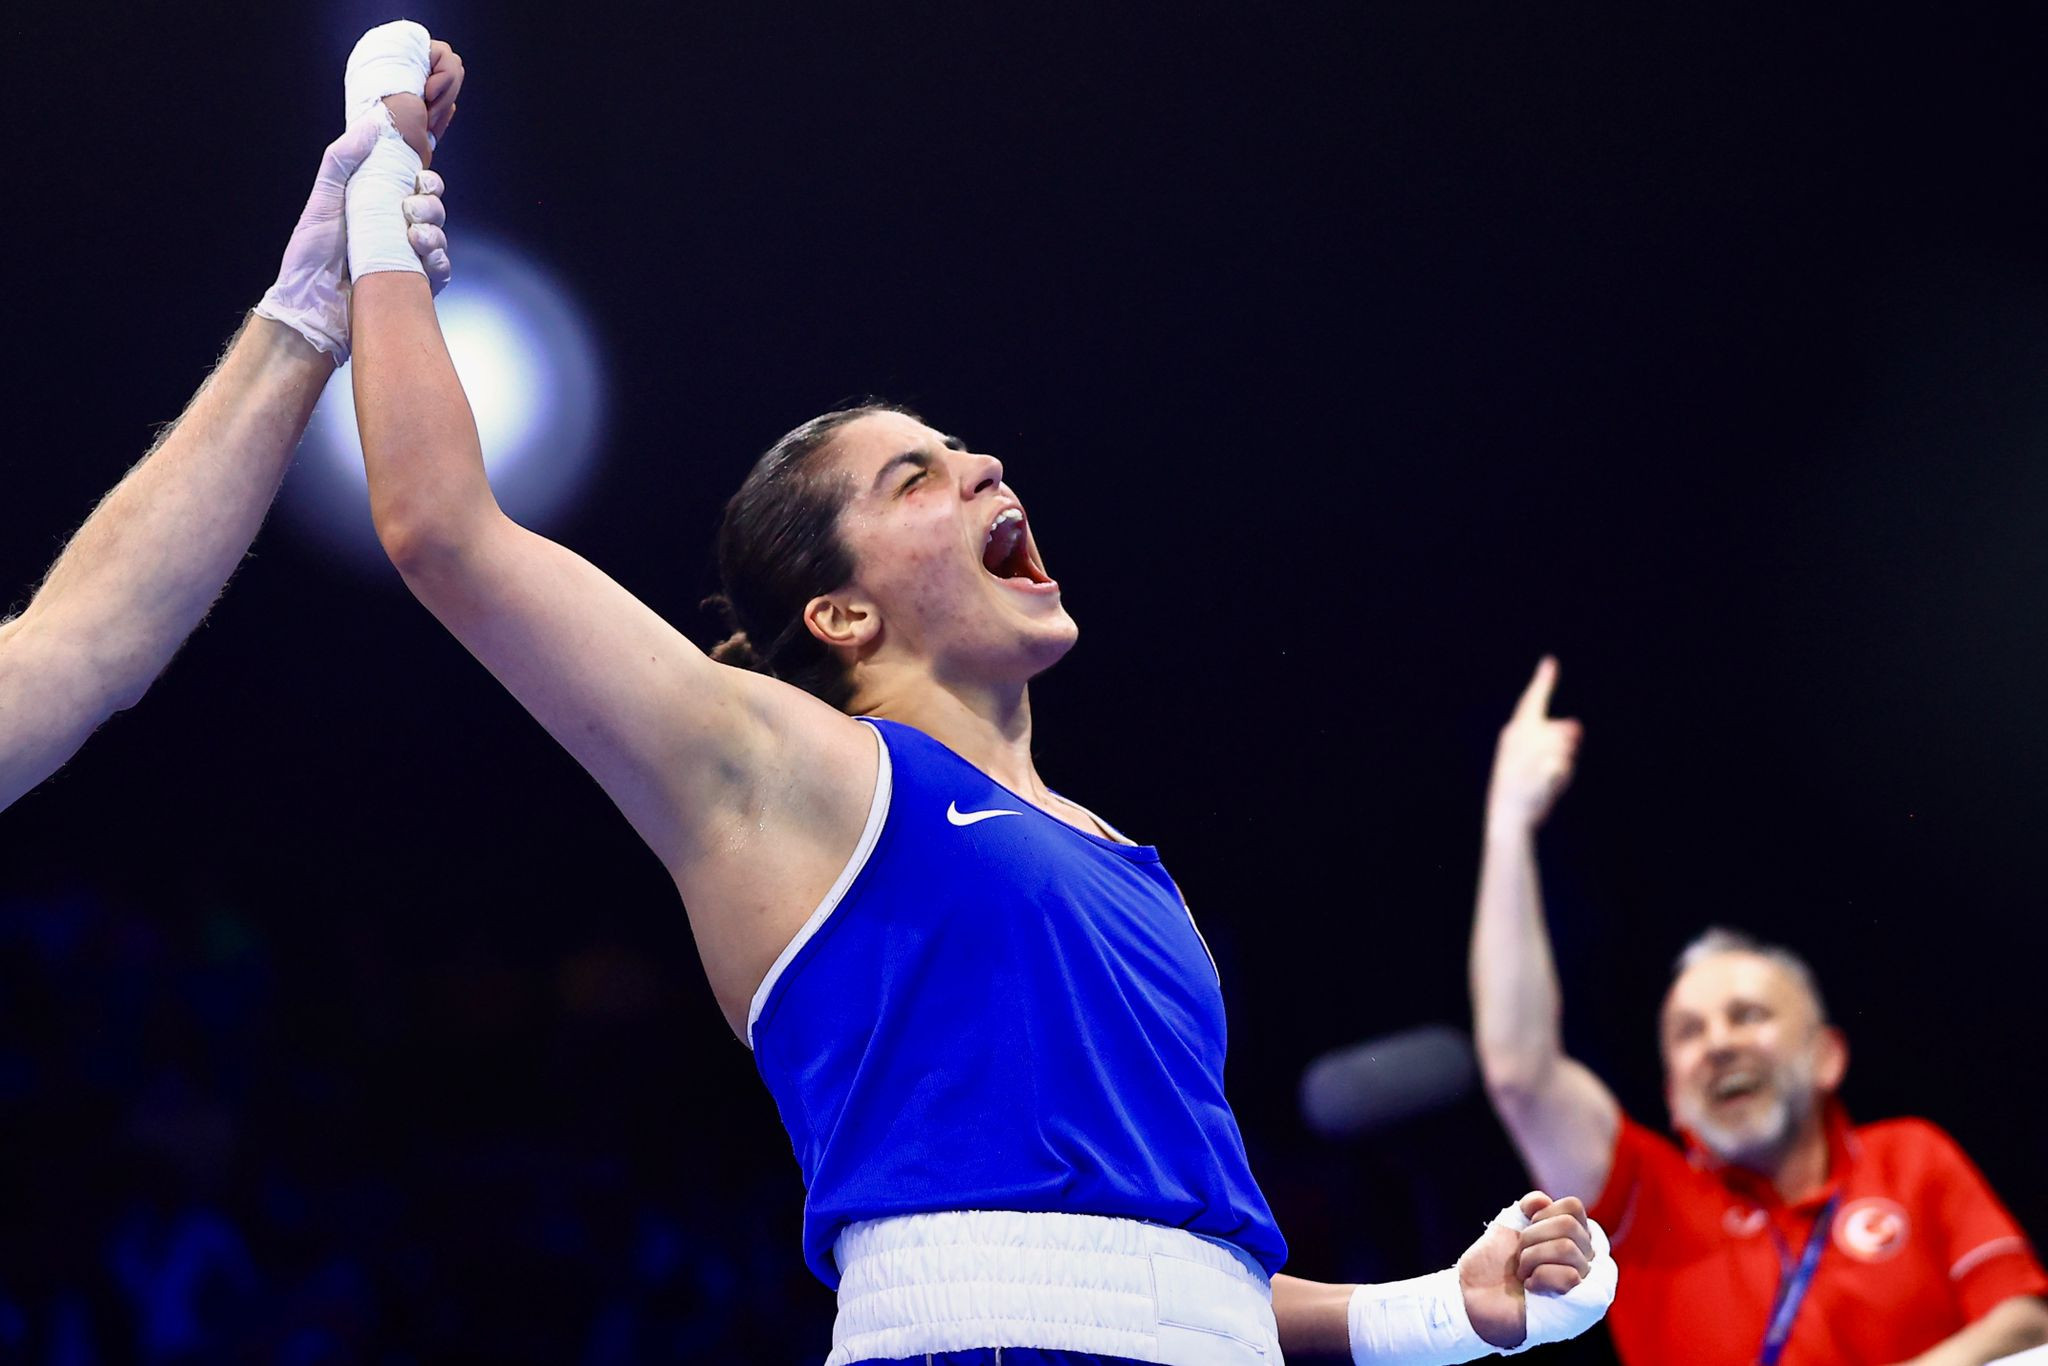 Hosts Turkey round off Women's World Boxing Championships with four golds